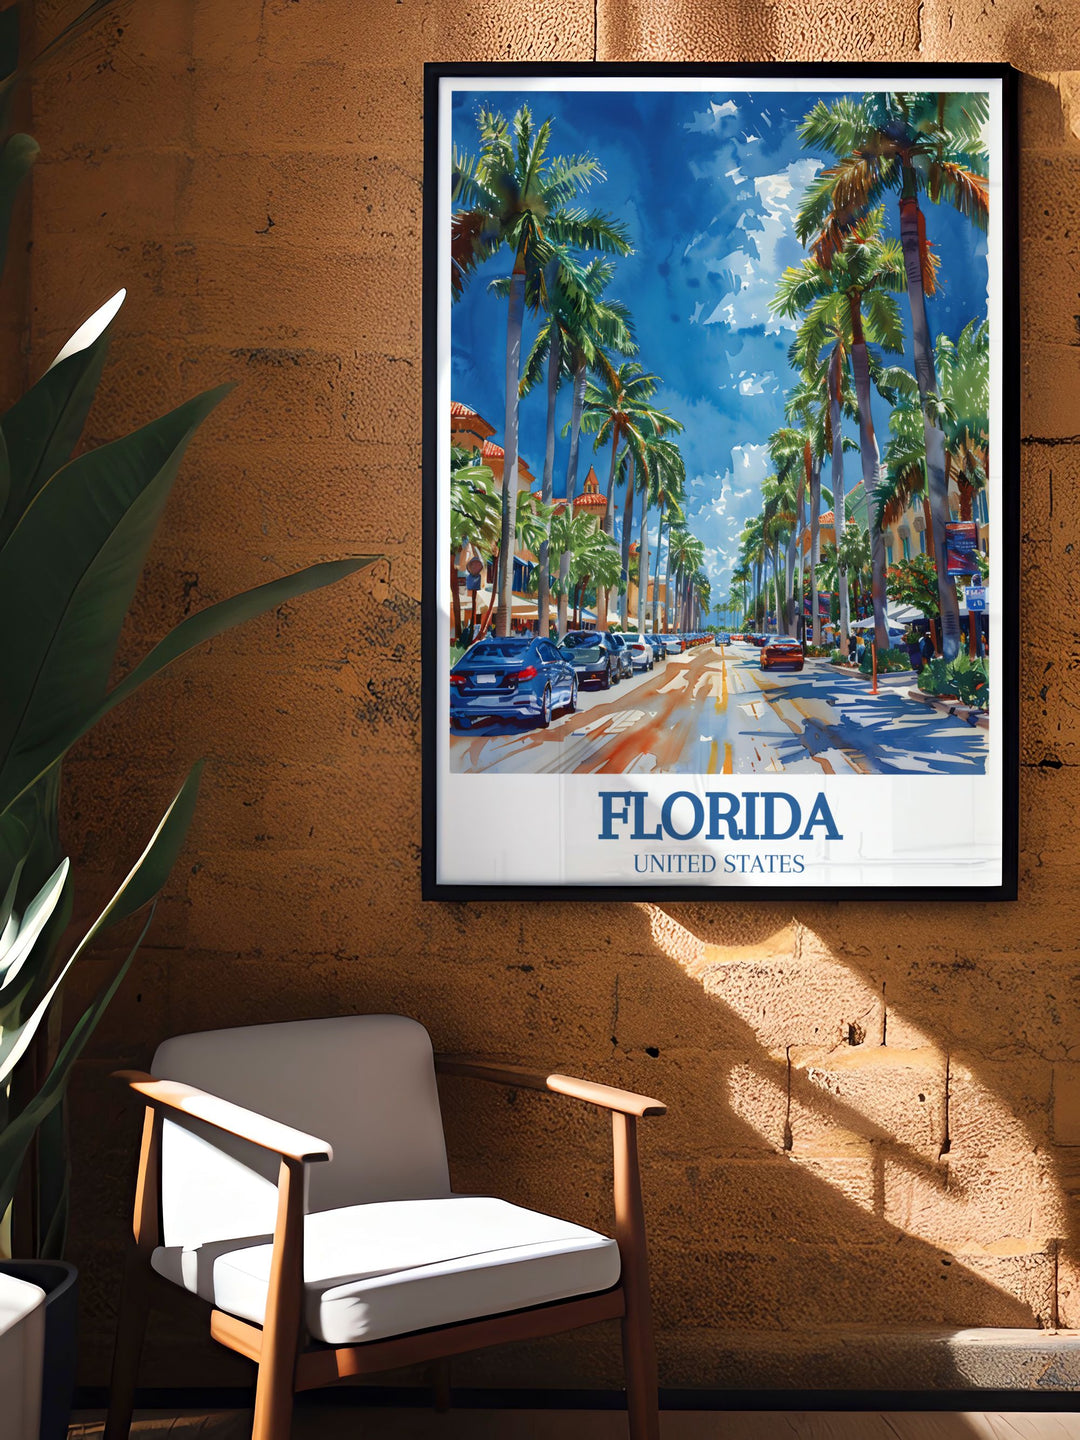 This print captures the lively boardwalk and serene ocean views of Miami Beach, perfect for enhancing your home decor.